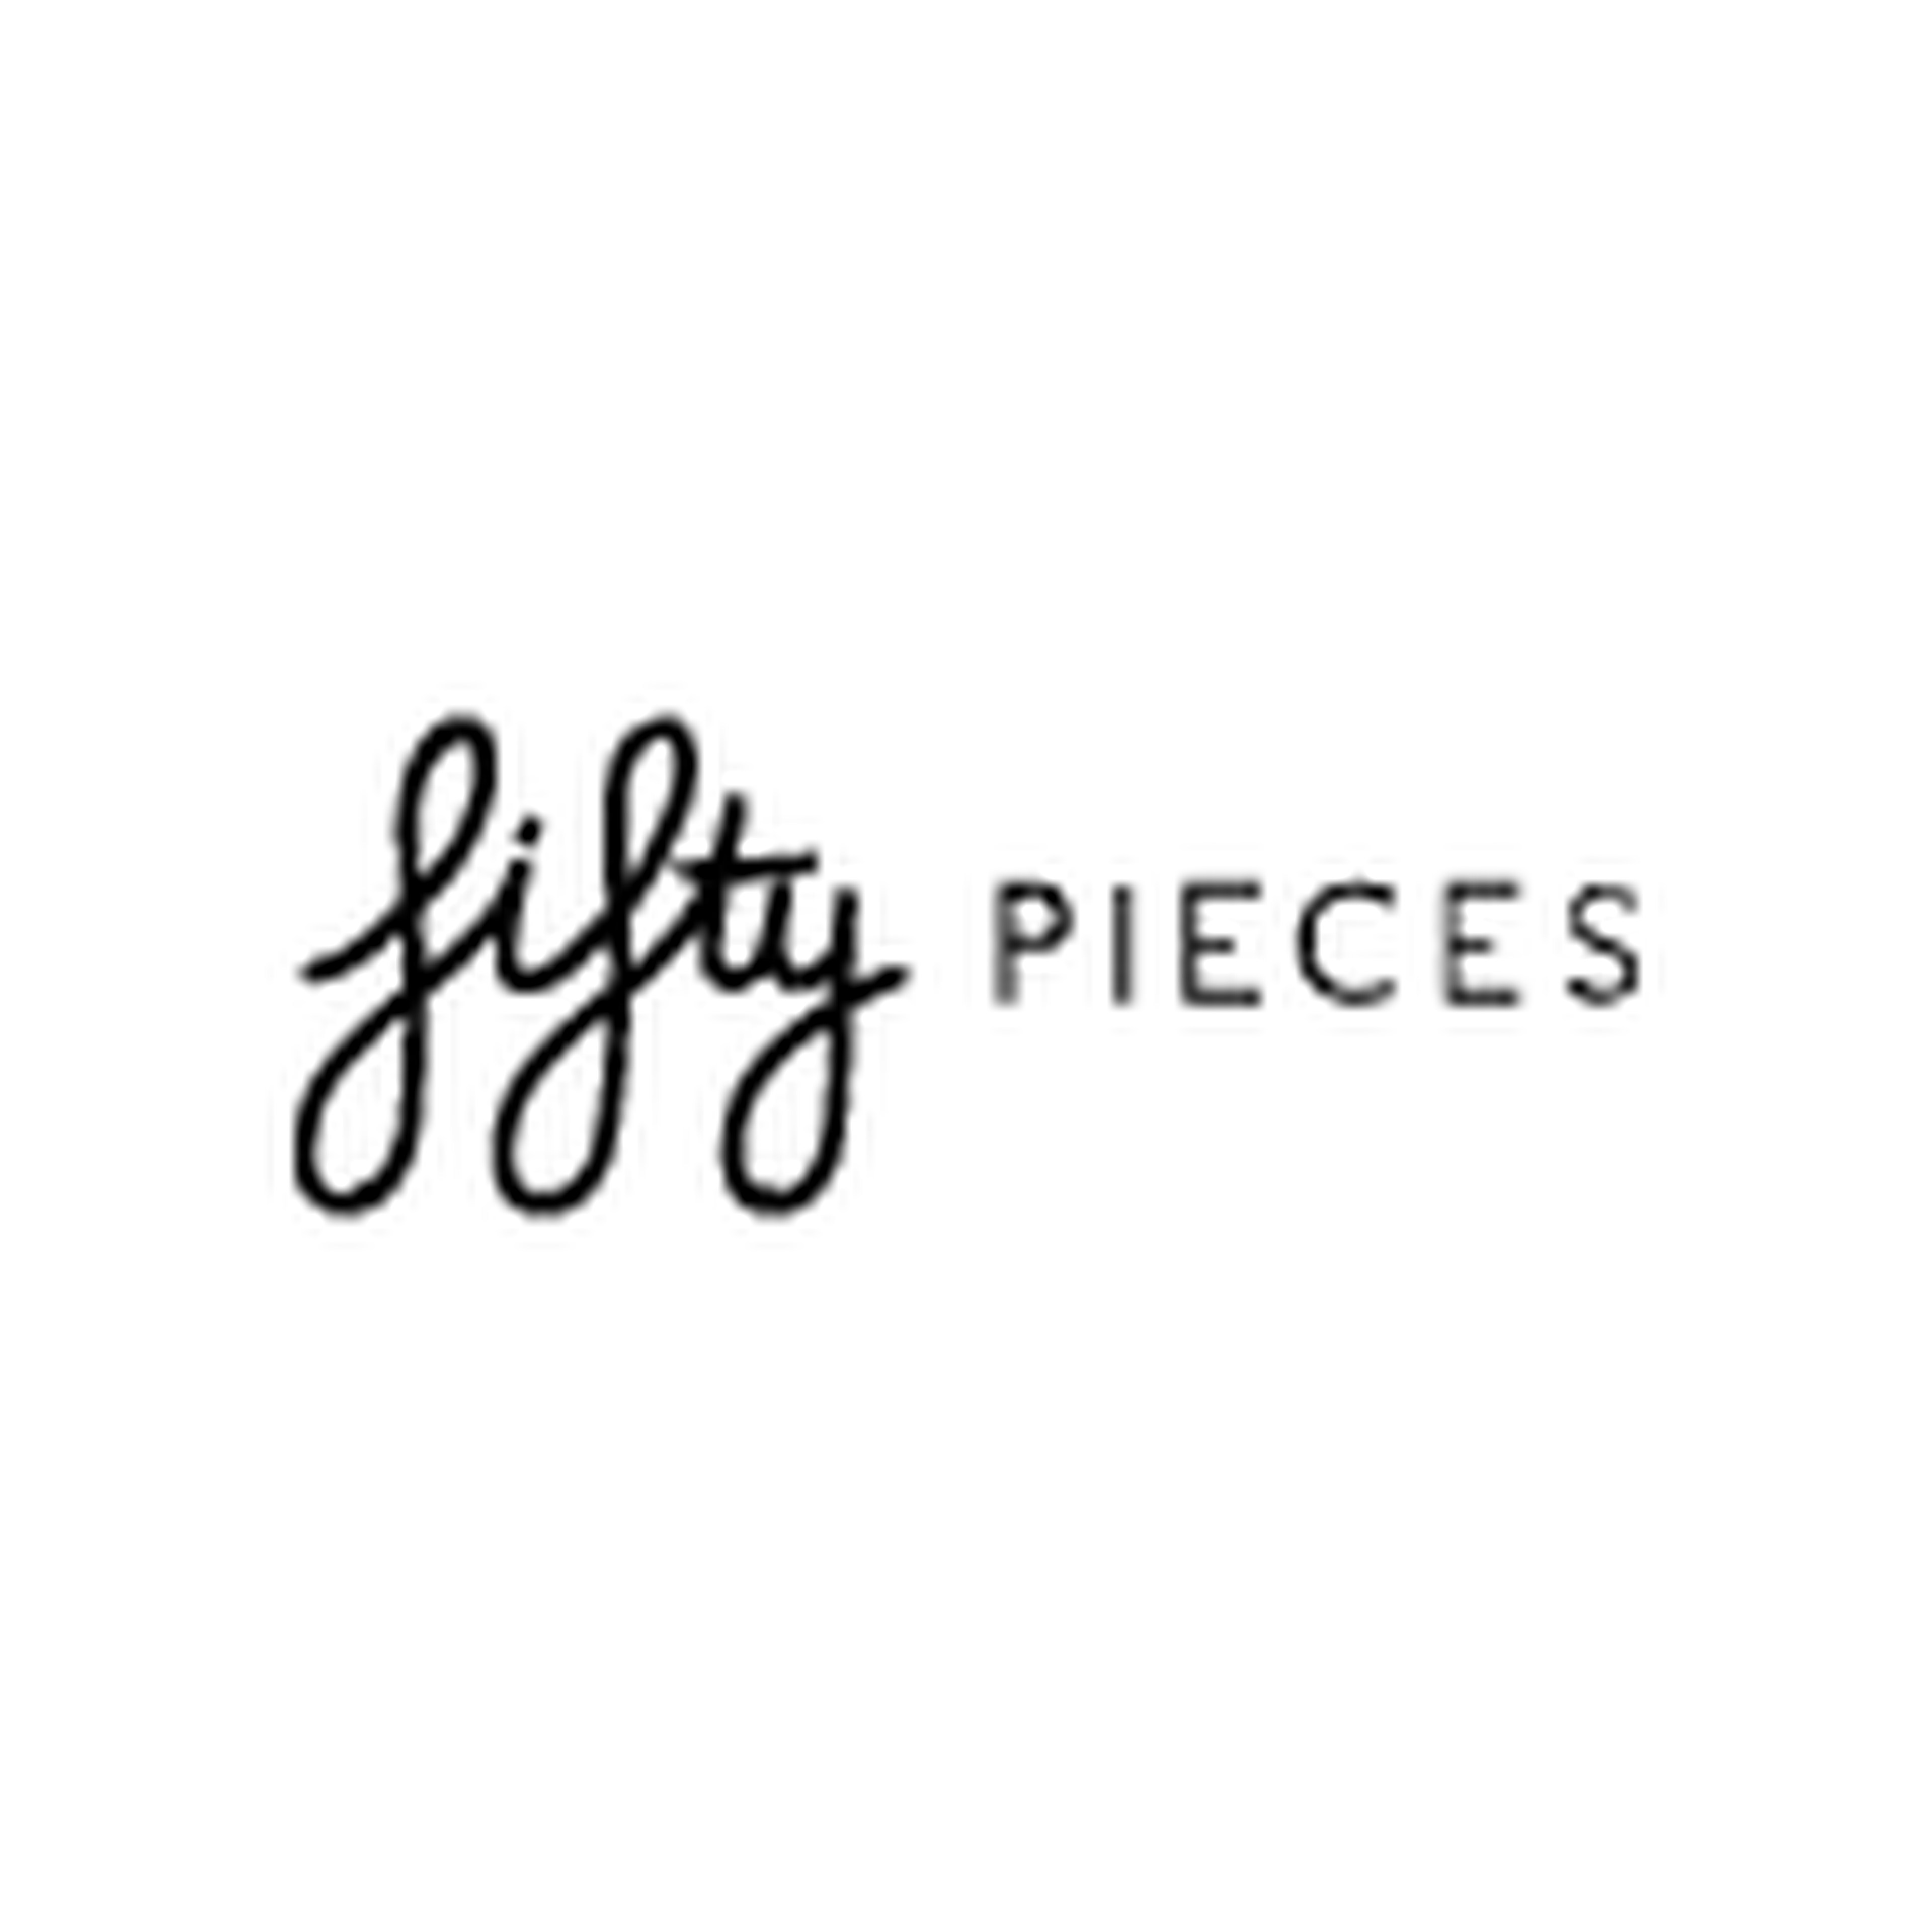 Fifty Pieces